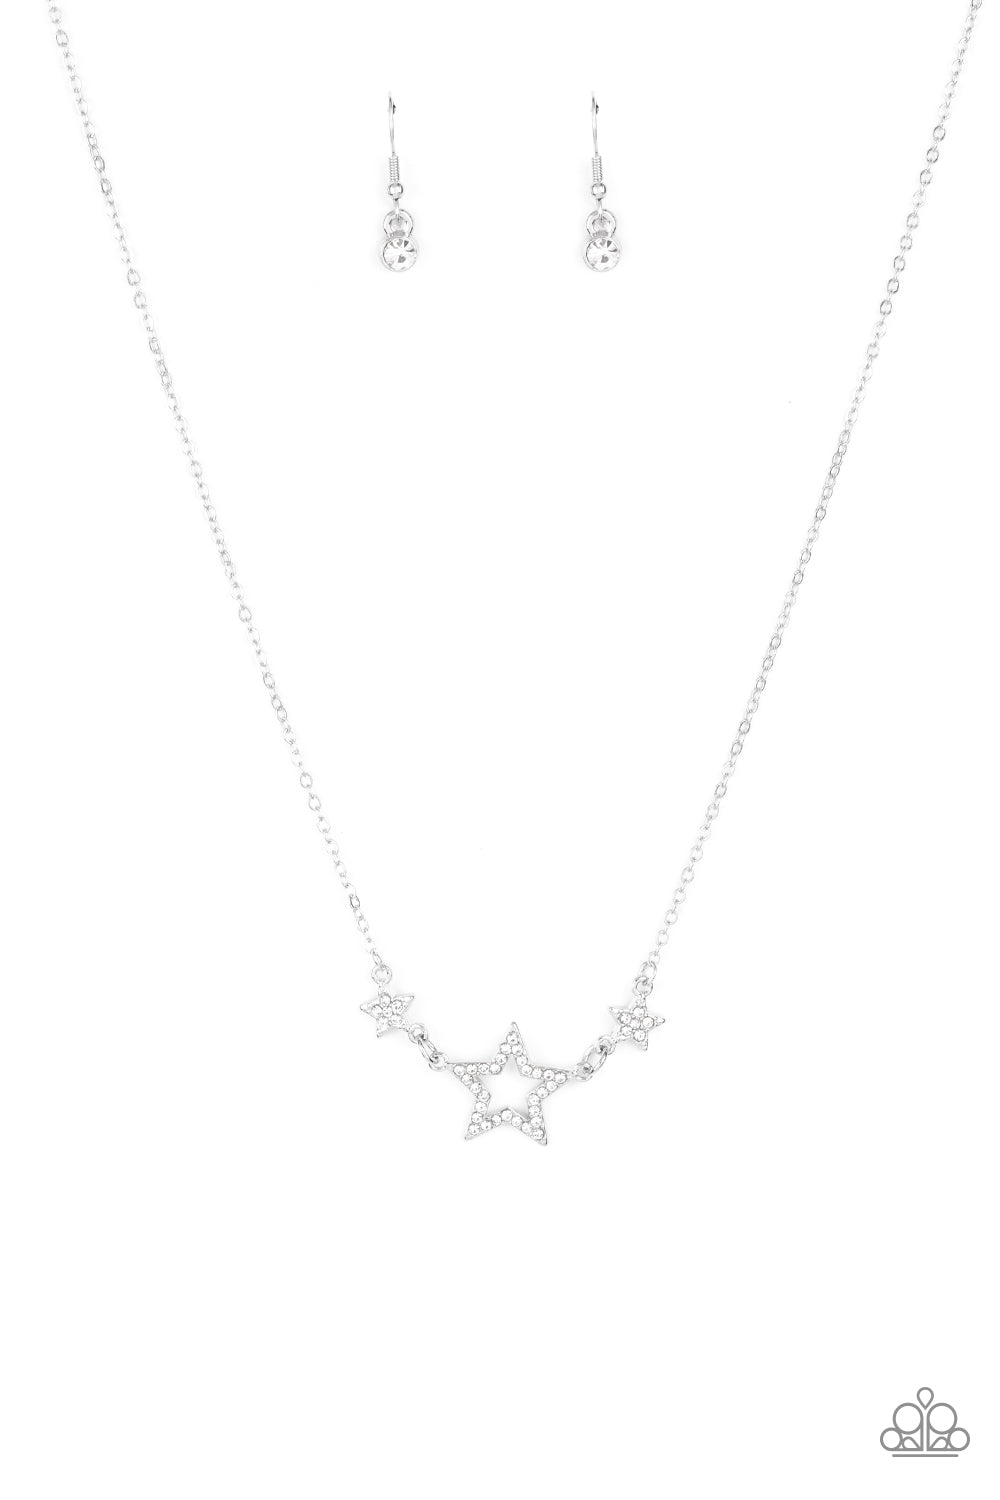 United We Sparkle Paparazzi Accessories Necklace with Earrings  - White